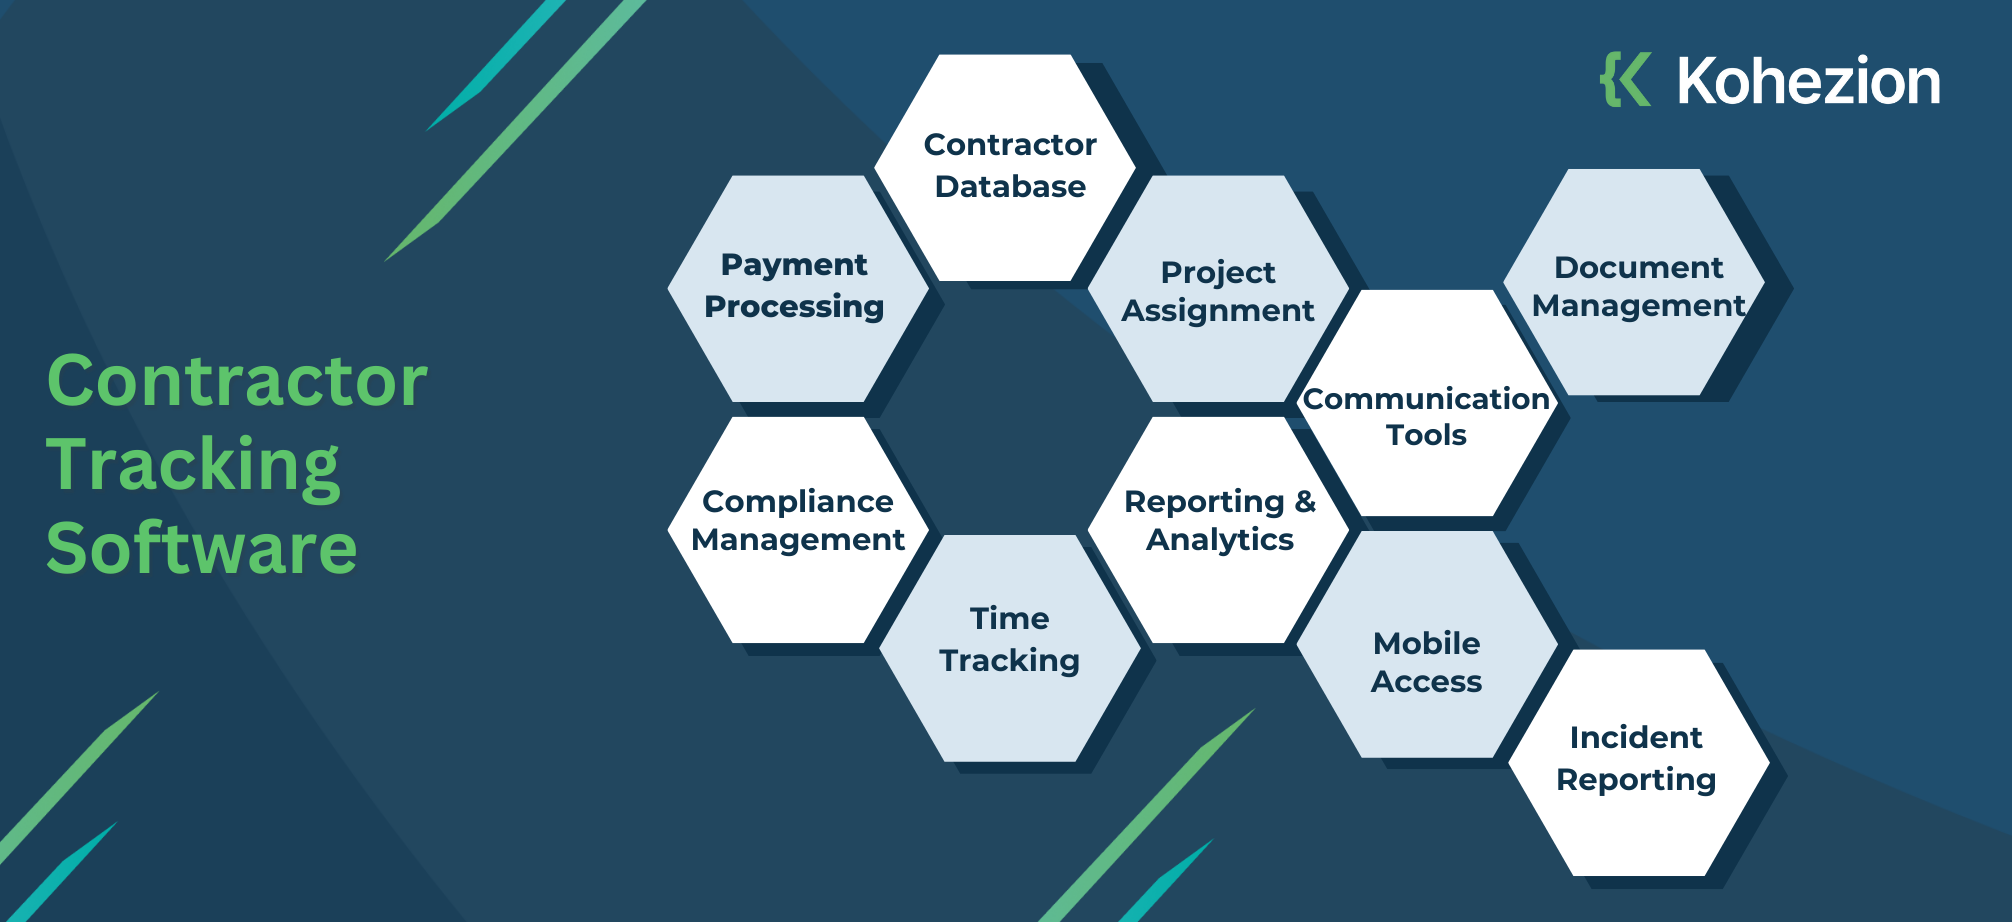 contractor tracking software modules